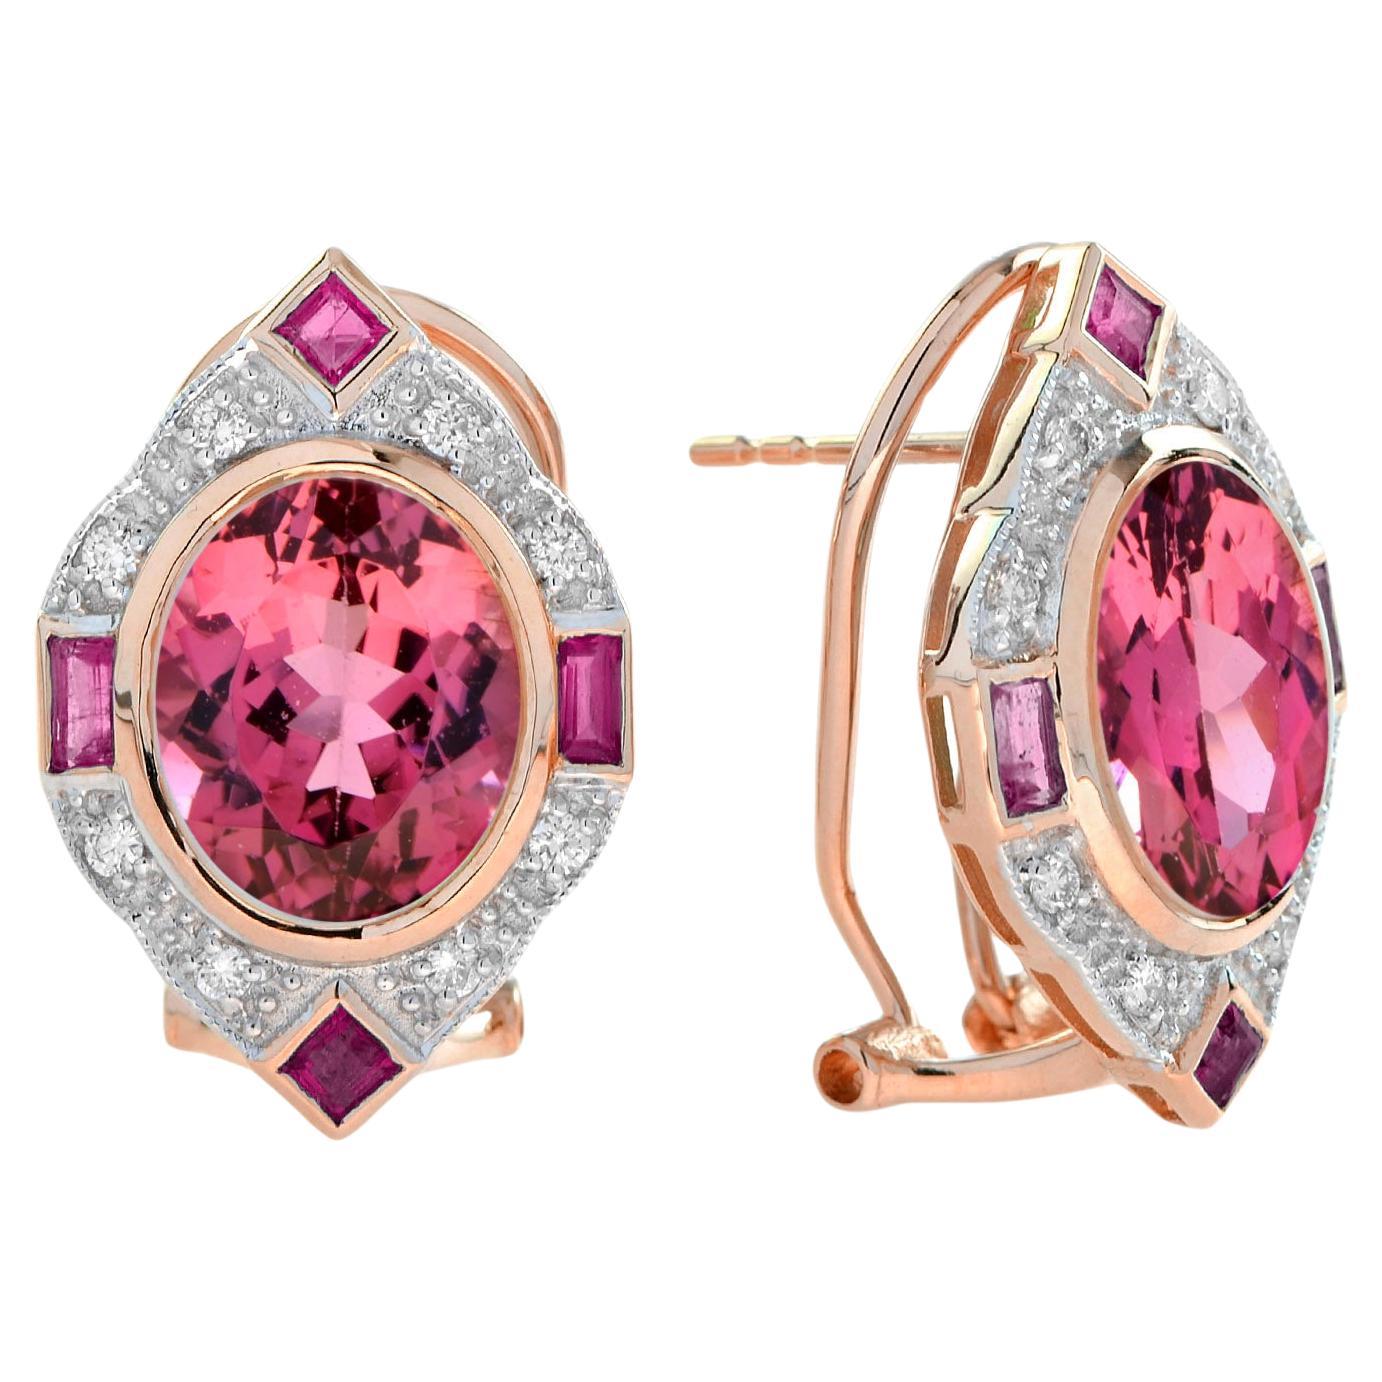 10.48 Ct. Pink Tourmaline Ruby and Diamond Vintage Inspired Earrings in 14K Gold